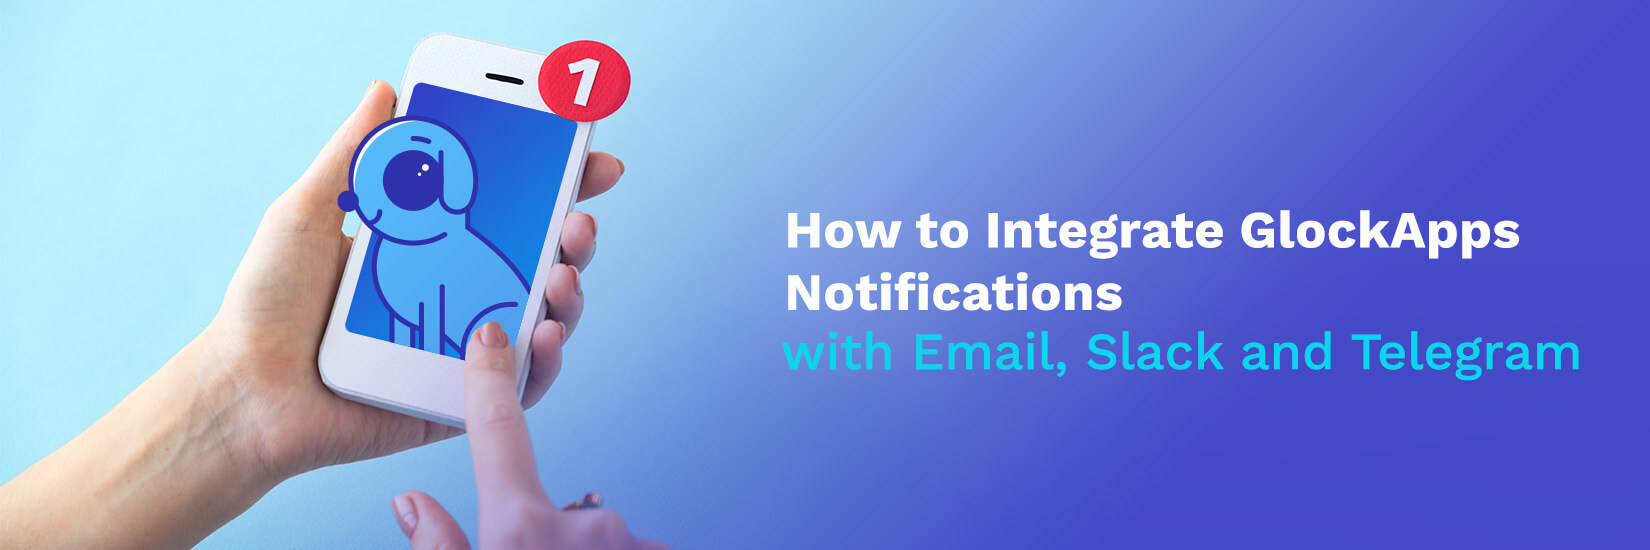 How to Integrate GlockApps Notifications with Email, Slack & Telegram